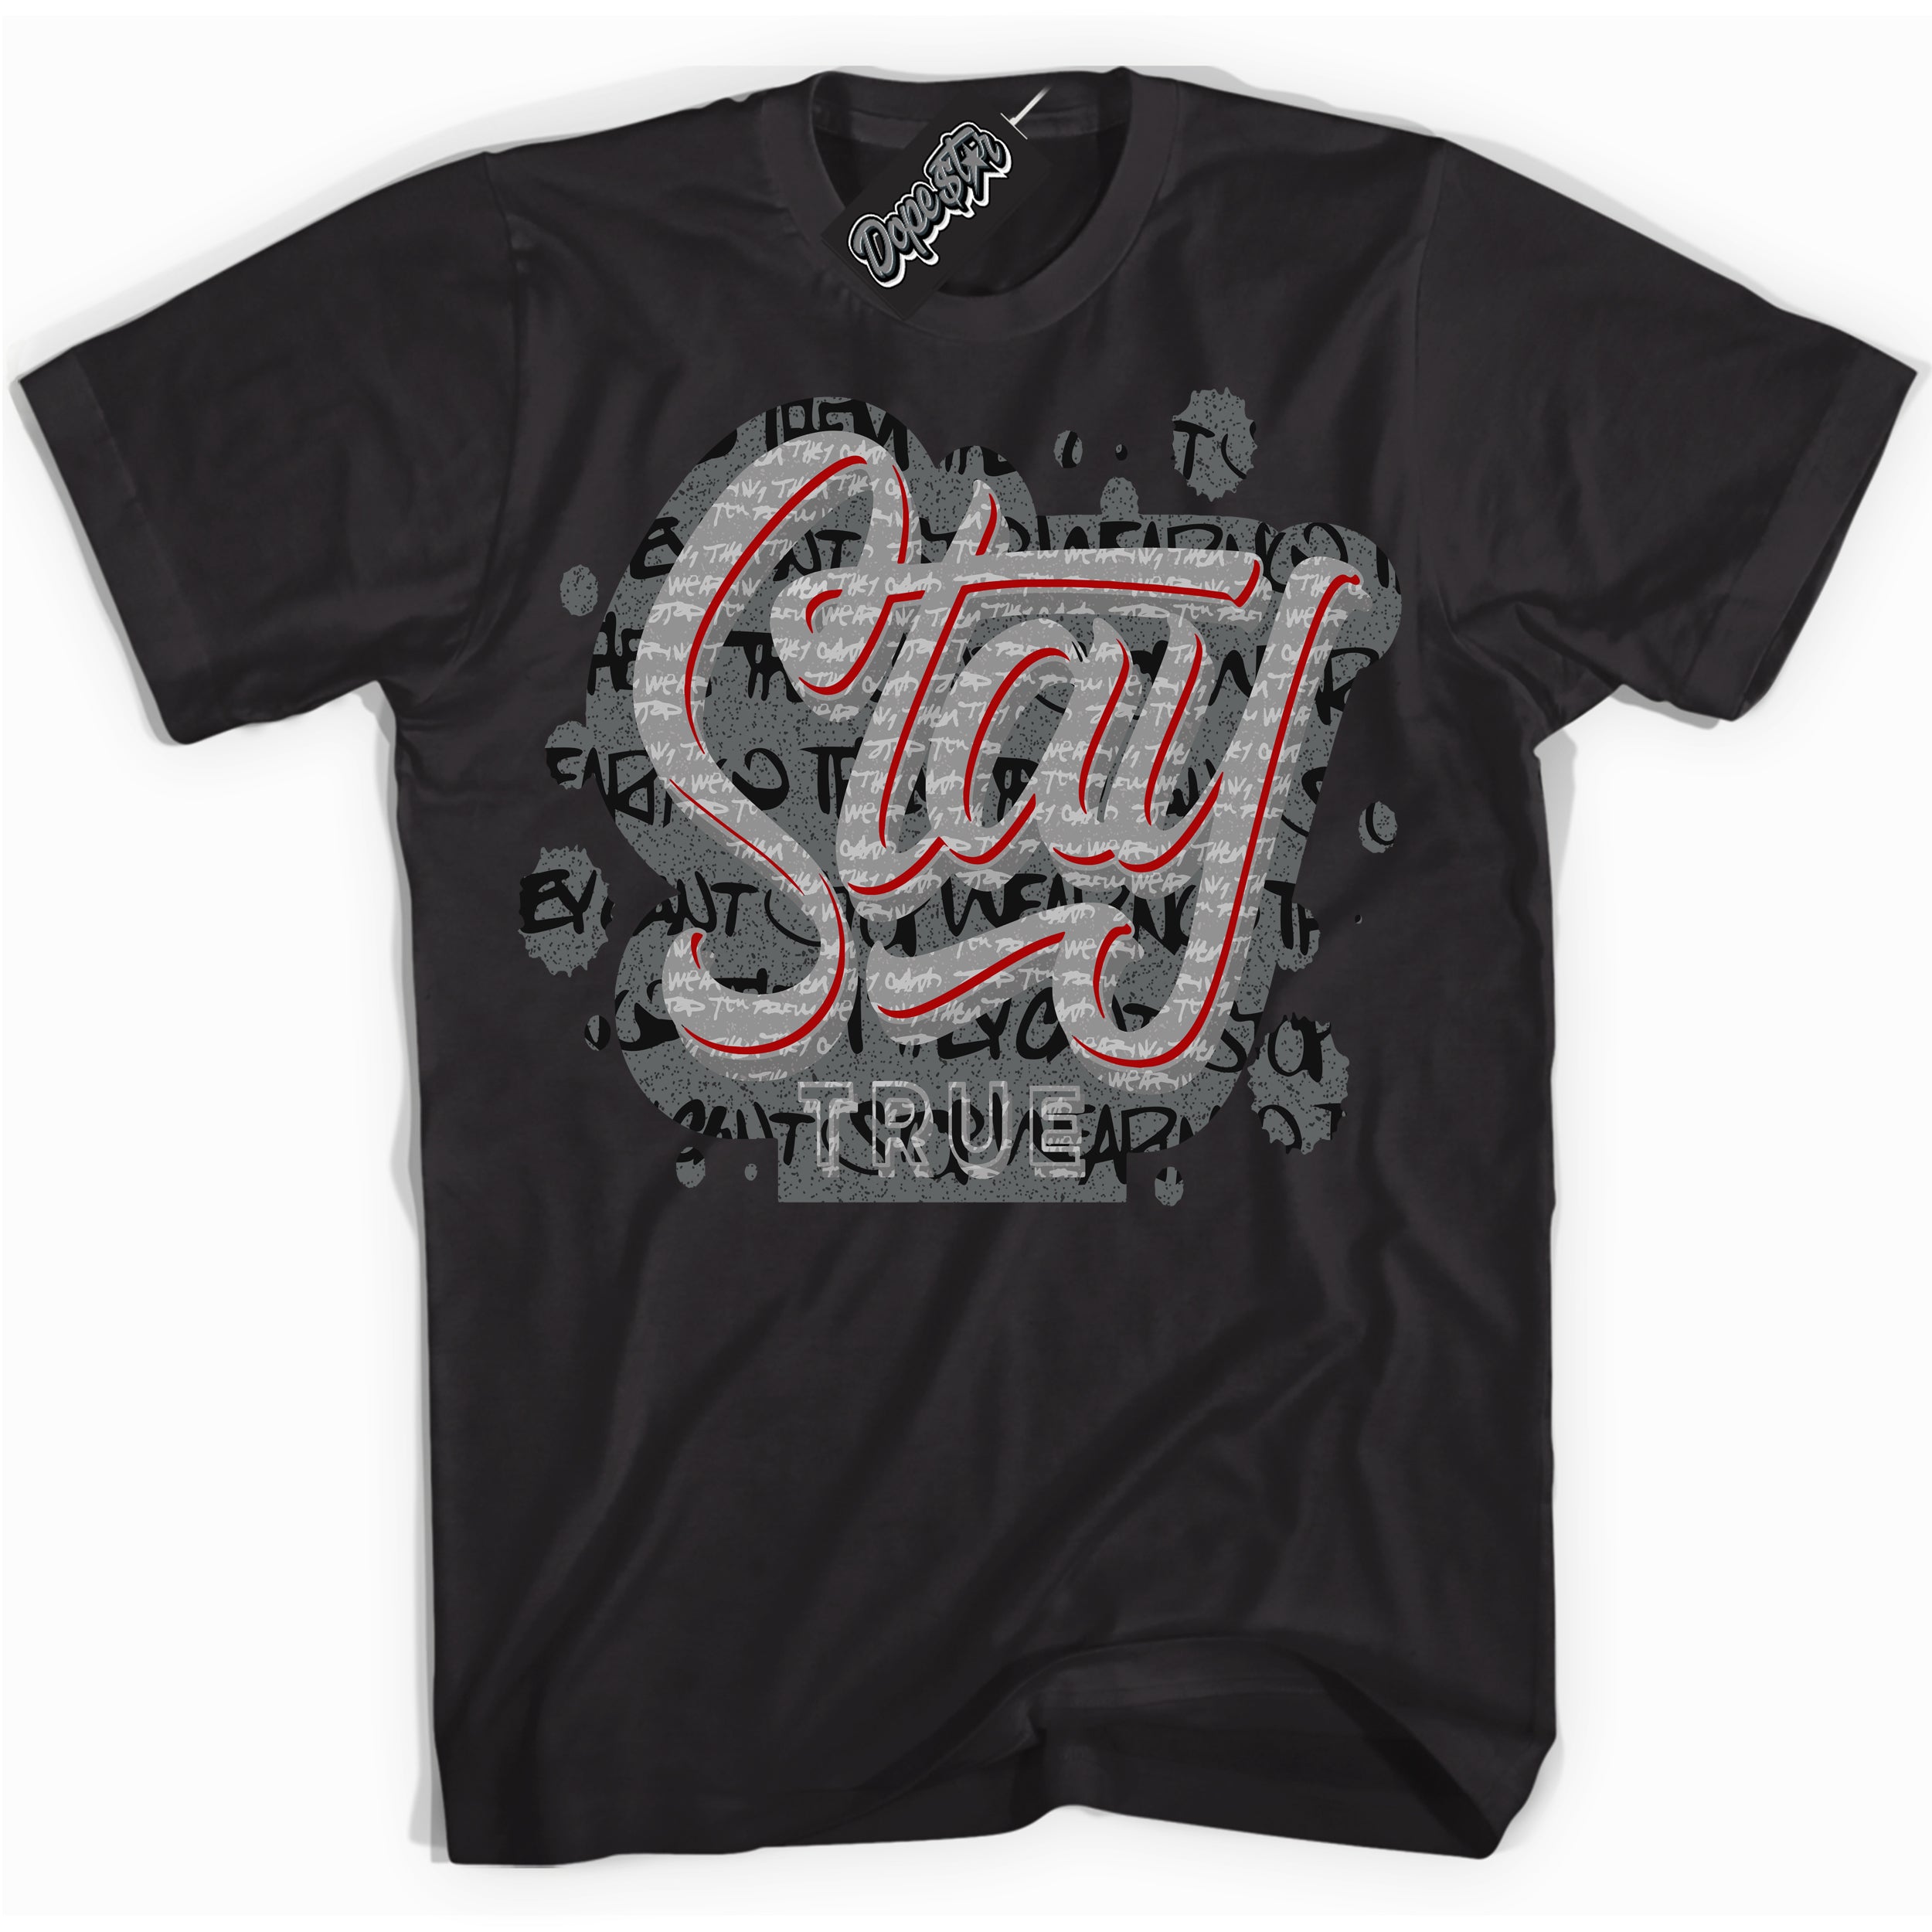 Cool Black Shirt with “ Stay True ” design that perfectly matches Rebellionaire 1s Sneakers.